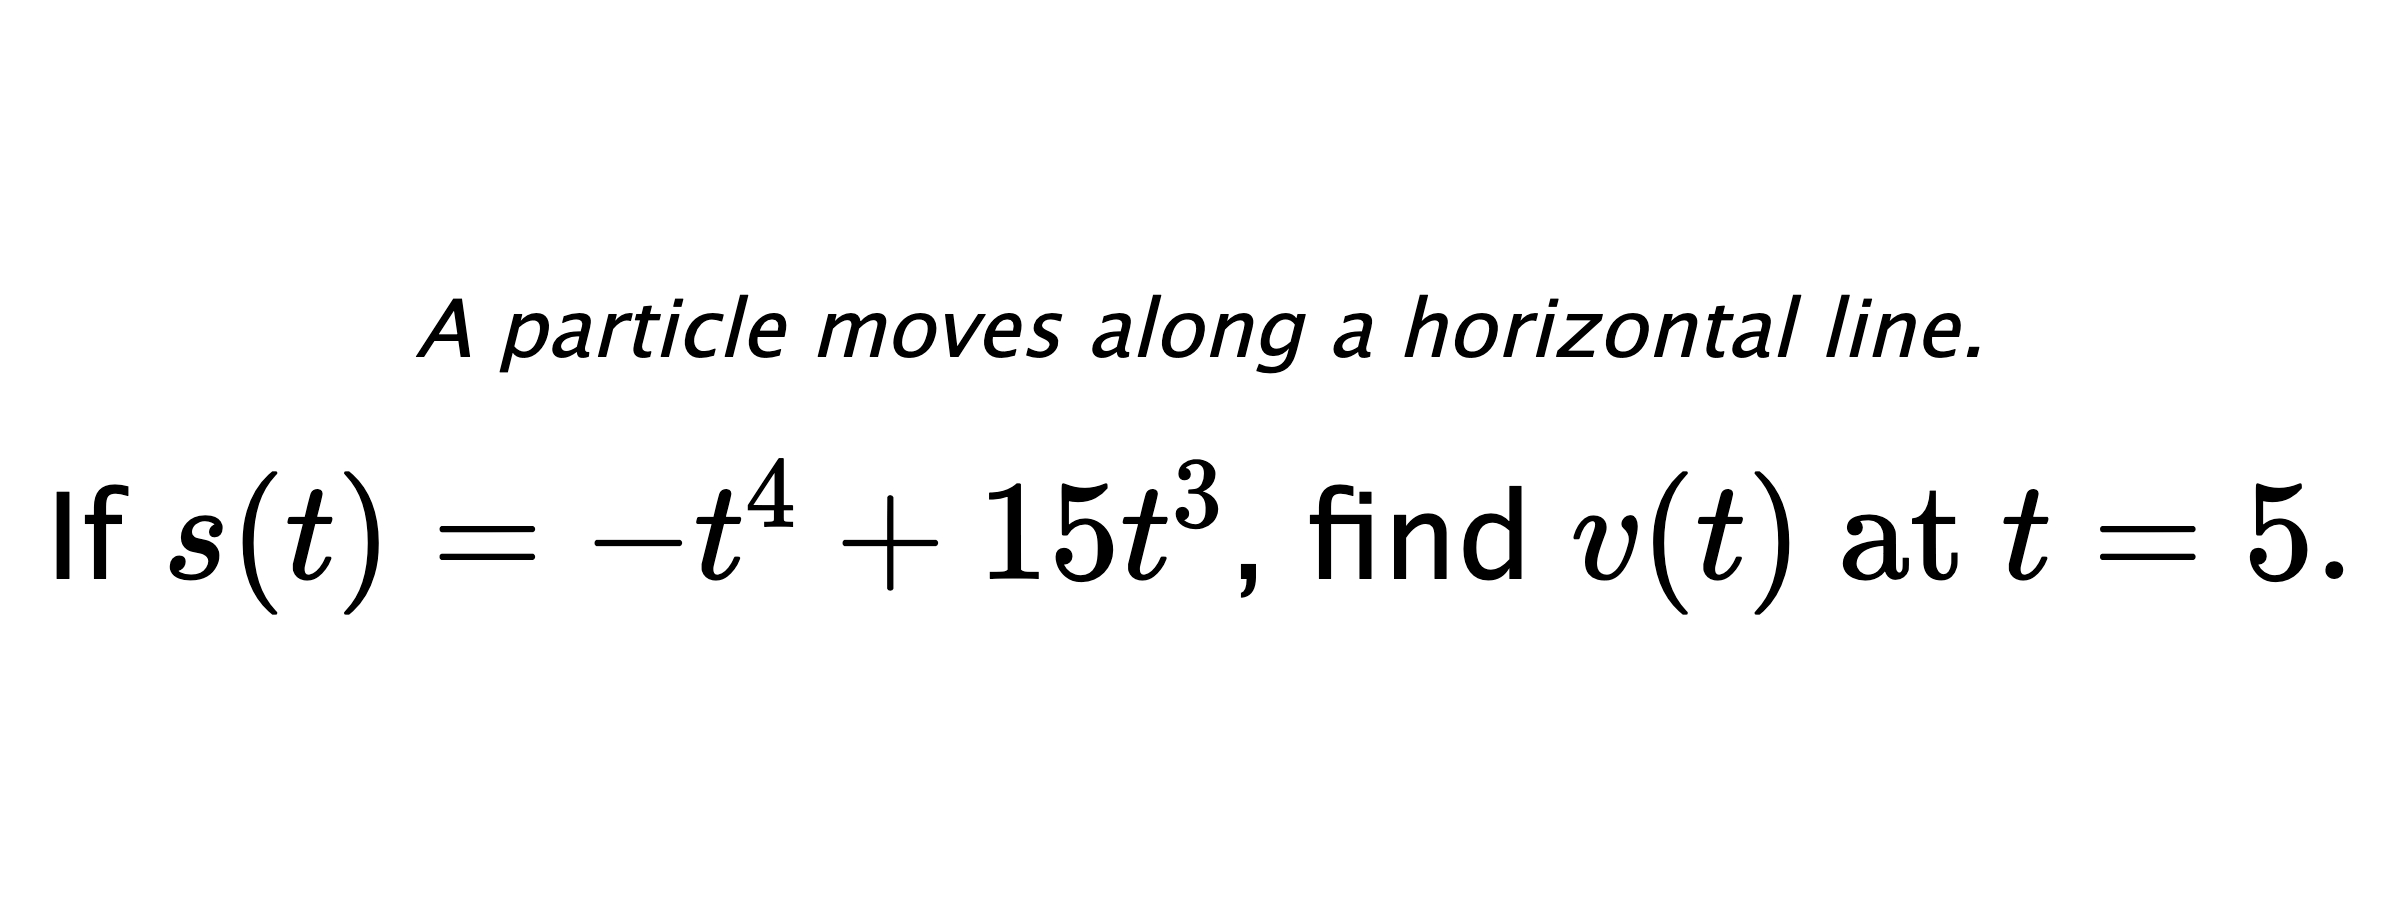 A particle moves along a horizontal line. If $ s(t)=-t^4+15t^3 $, find $ v(t) \text{ at } t=5. $